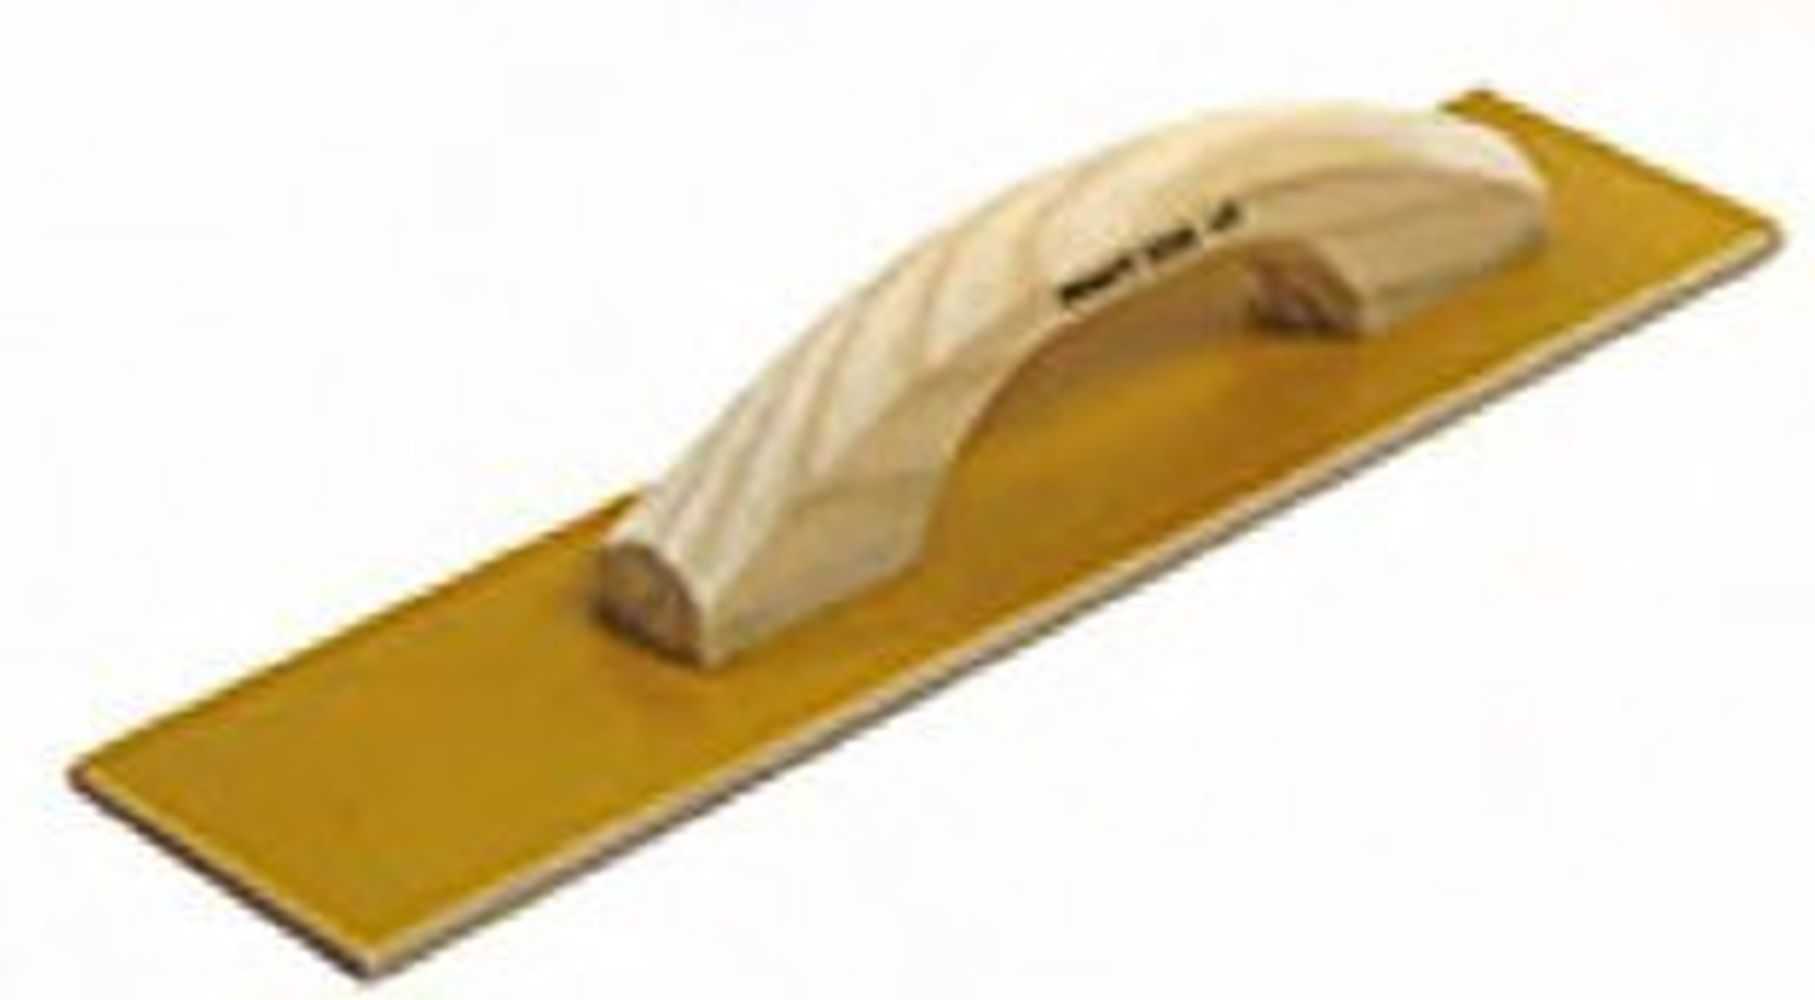 Kraft CF531 Square End Laminated Canvas Float w/Wood Handle, 16 x 5'